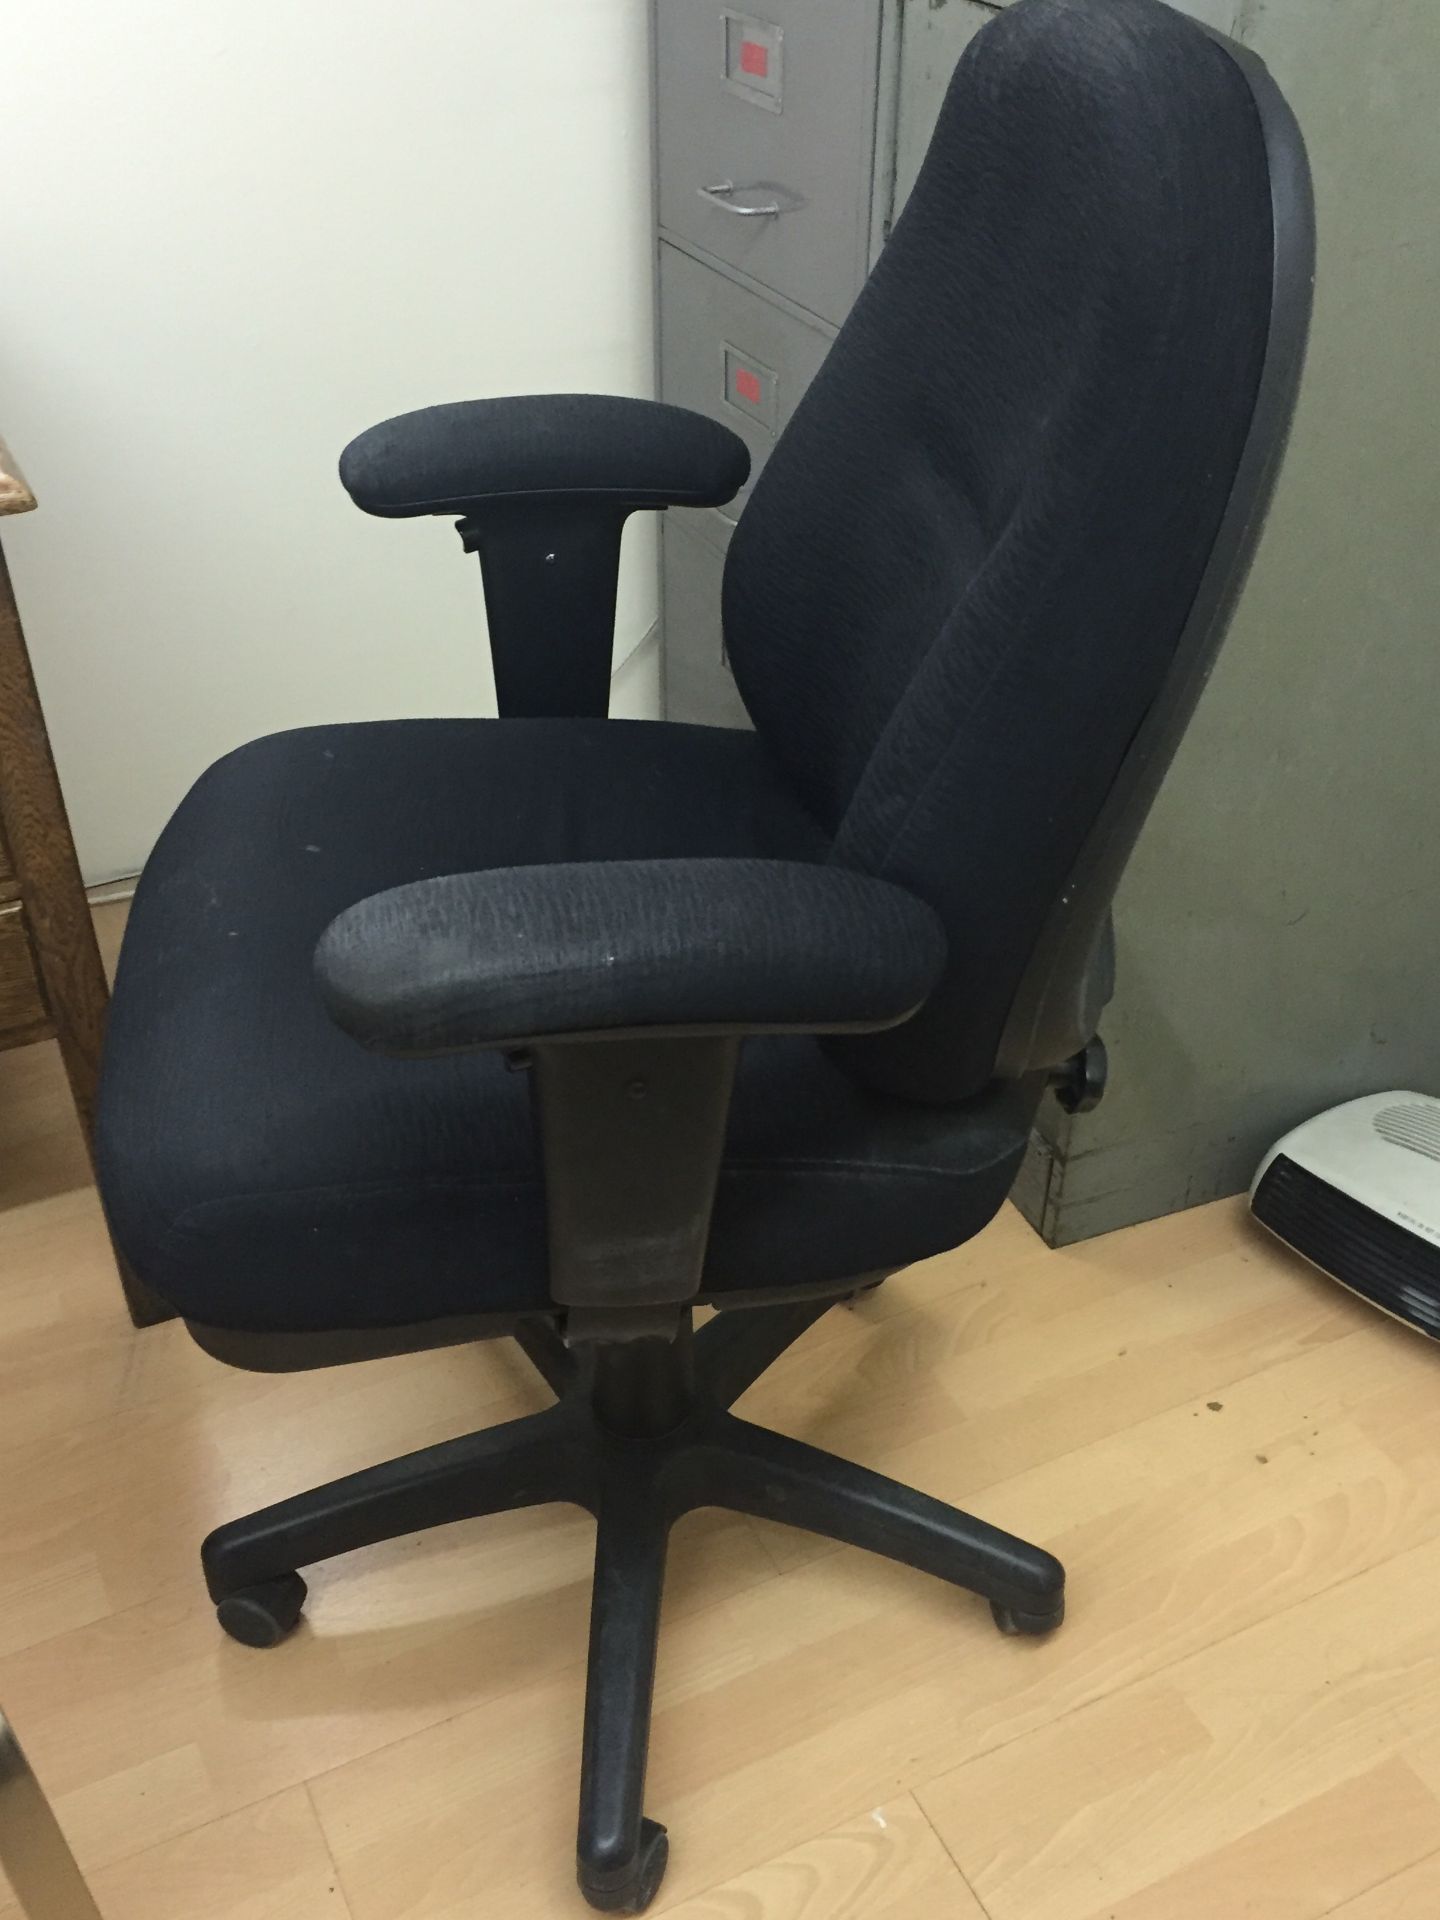 1 x Black Office Chair - CL171 - Location: London, N4 - Image 2 of 3